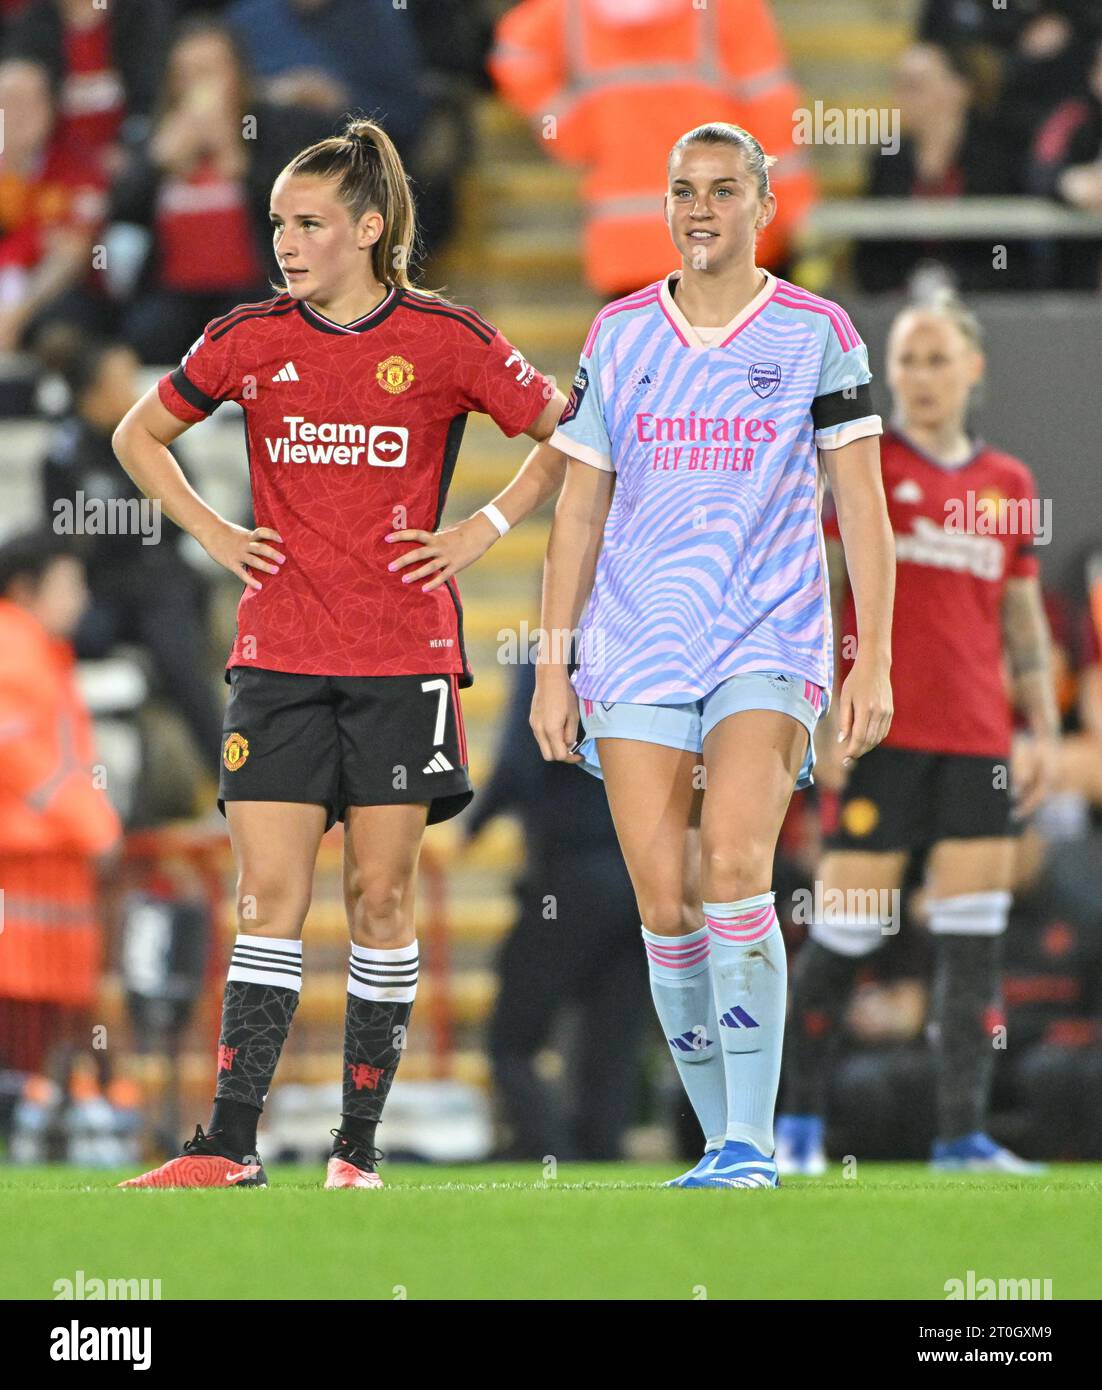 Leigh Sports Village, Leigh, Greater Manchester, England. 6th October 2023. Alessia Russo #23 of Arsenal Women and Ella Toone #7 of Manchester United Women wait for the kick off, during Manchester United Women Football Club V Arsenal Women Football Club at Leigh Sports Village, in the Barclays Women's Super League/Women’s Super League. (Credit Image: ©Cody Froggatt/Alamy Live News) Stock Photo